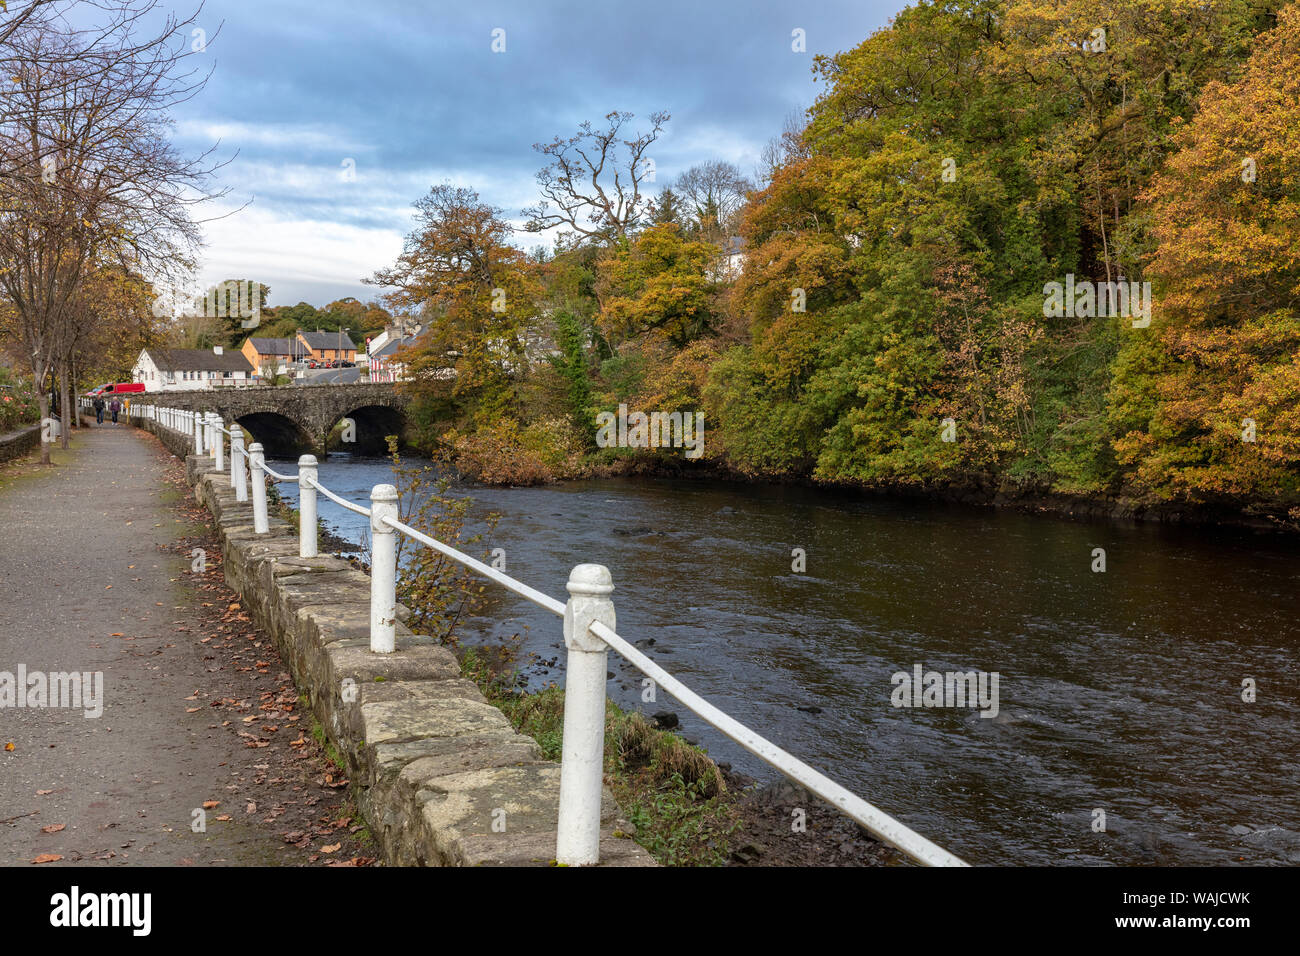 River Lennon running though the small town of Ramelton in County Donegal, Ireland Stock Photo